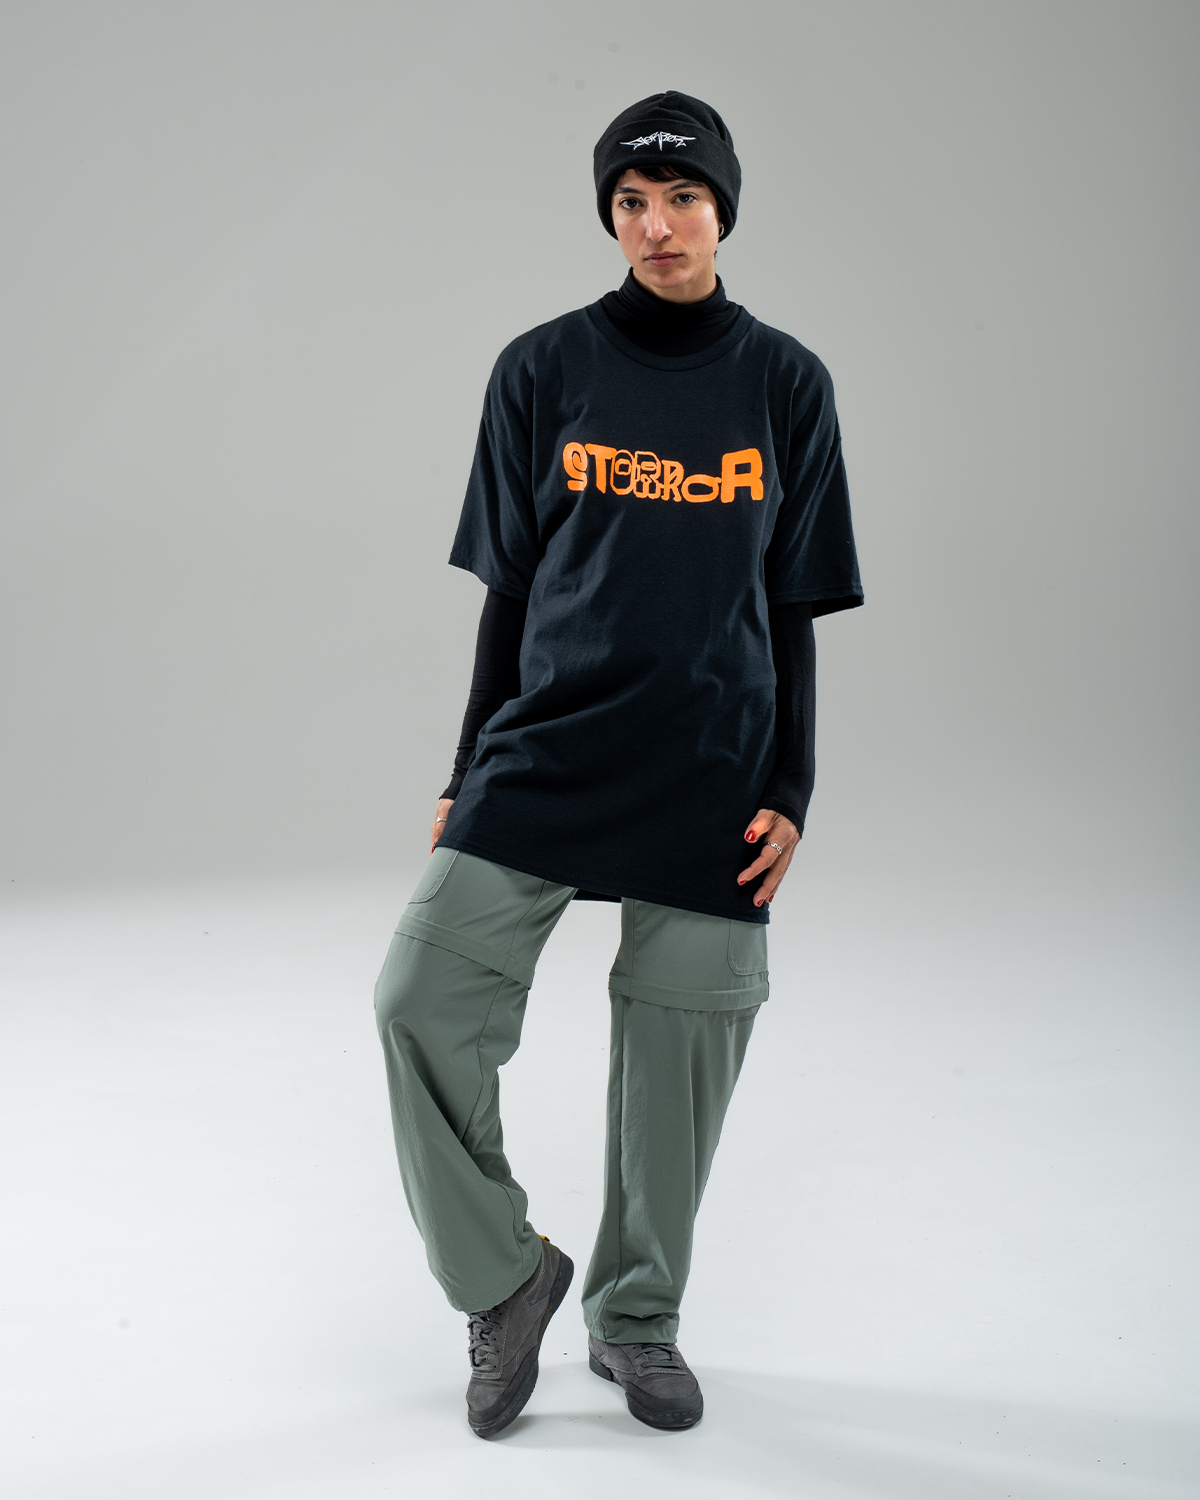 CITY T-SHIRT | STORROR | parkour clothing & technical sportswear